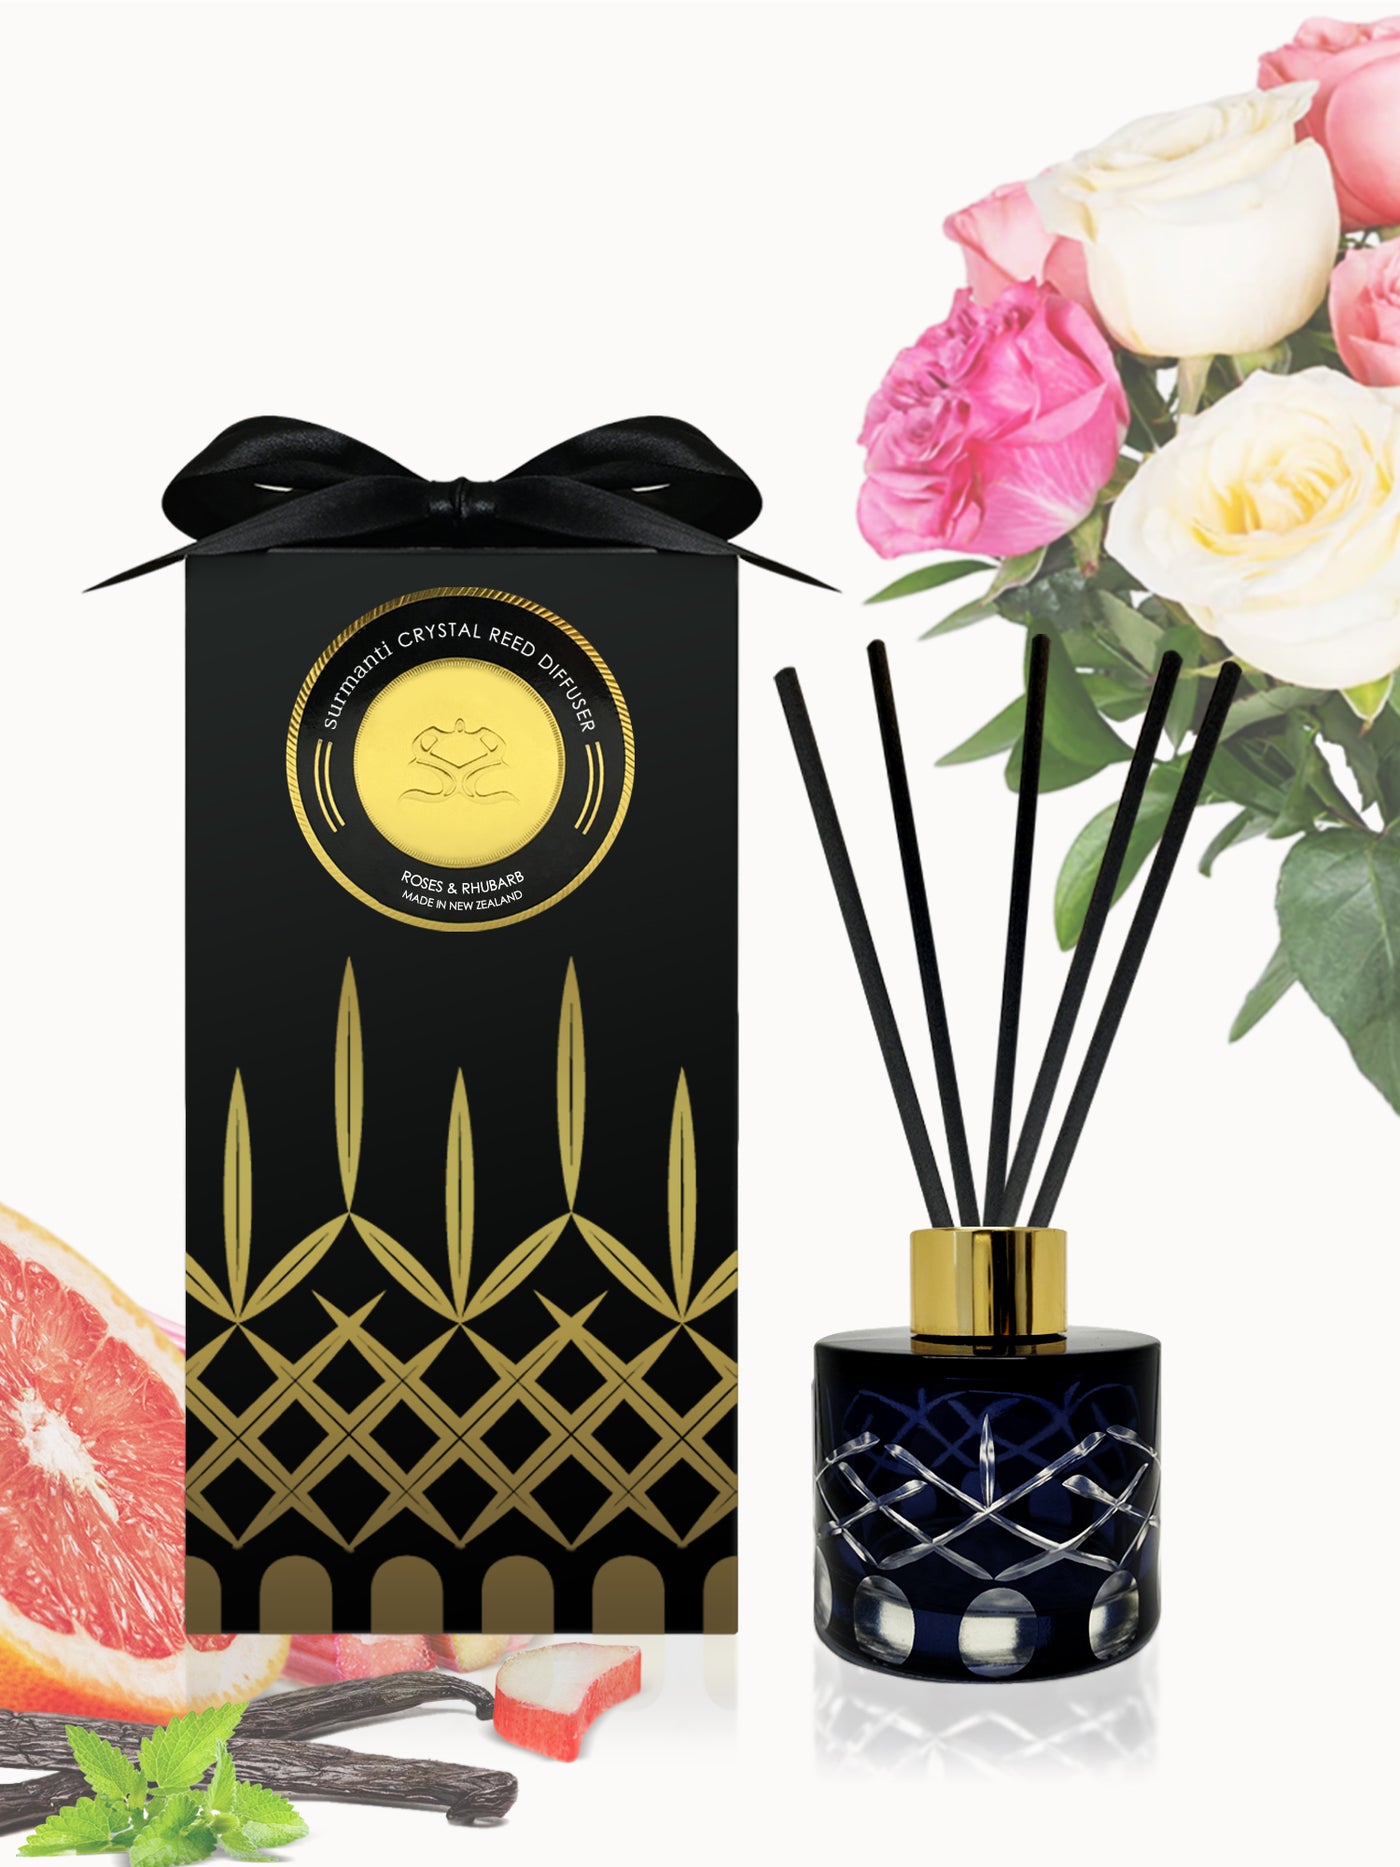 Roses & Rhubarb Crystal Series Reed Diffuser - Small Rooms 100ml